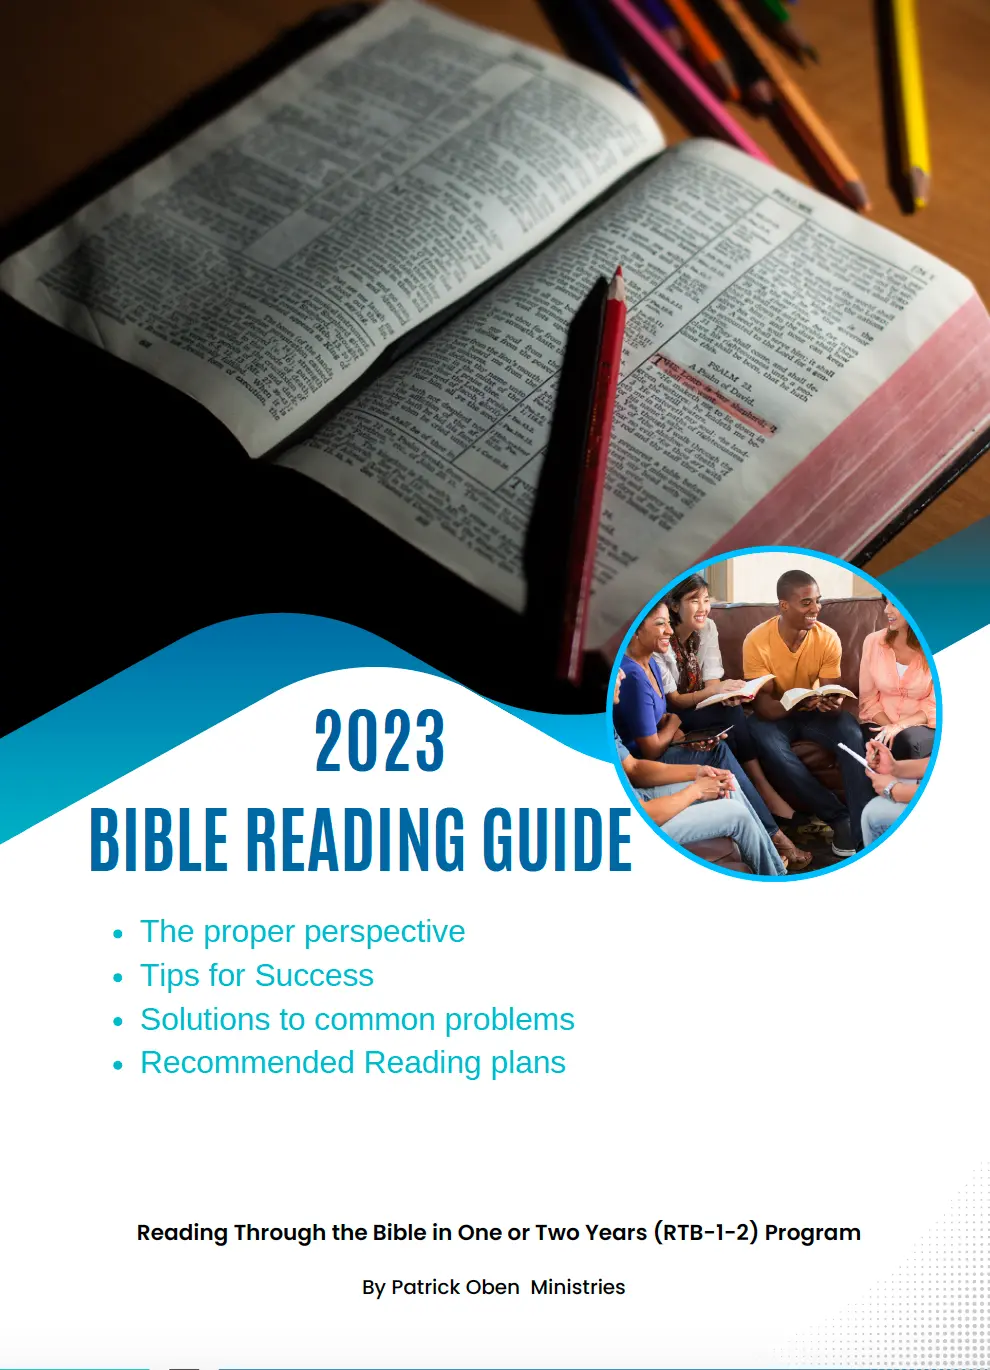 Bible reading guide showing front cover of ebook